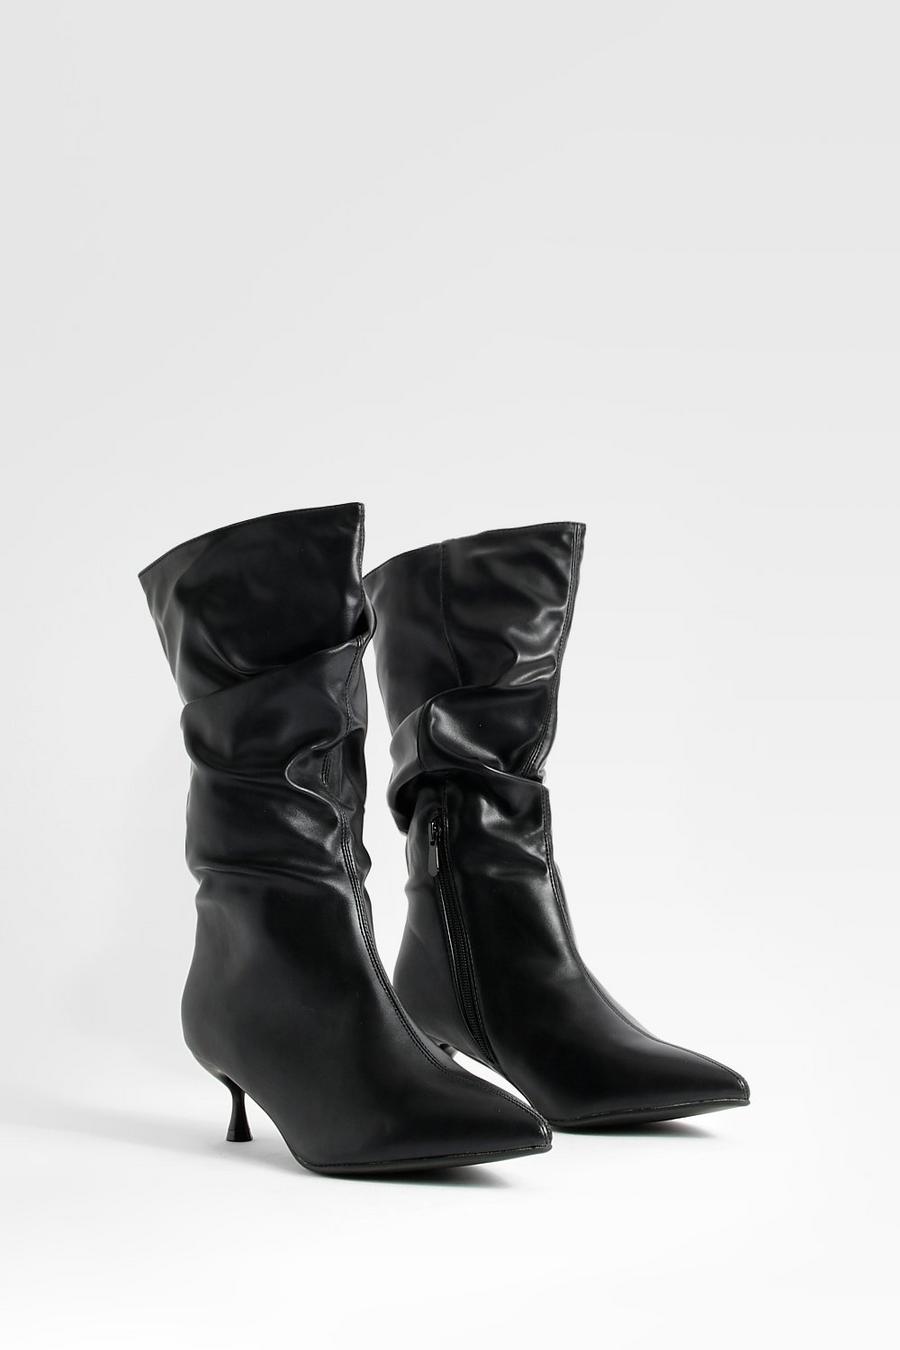 Black Wide Width Ruched Low Heel Knee High Boots image number 1